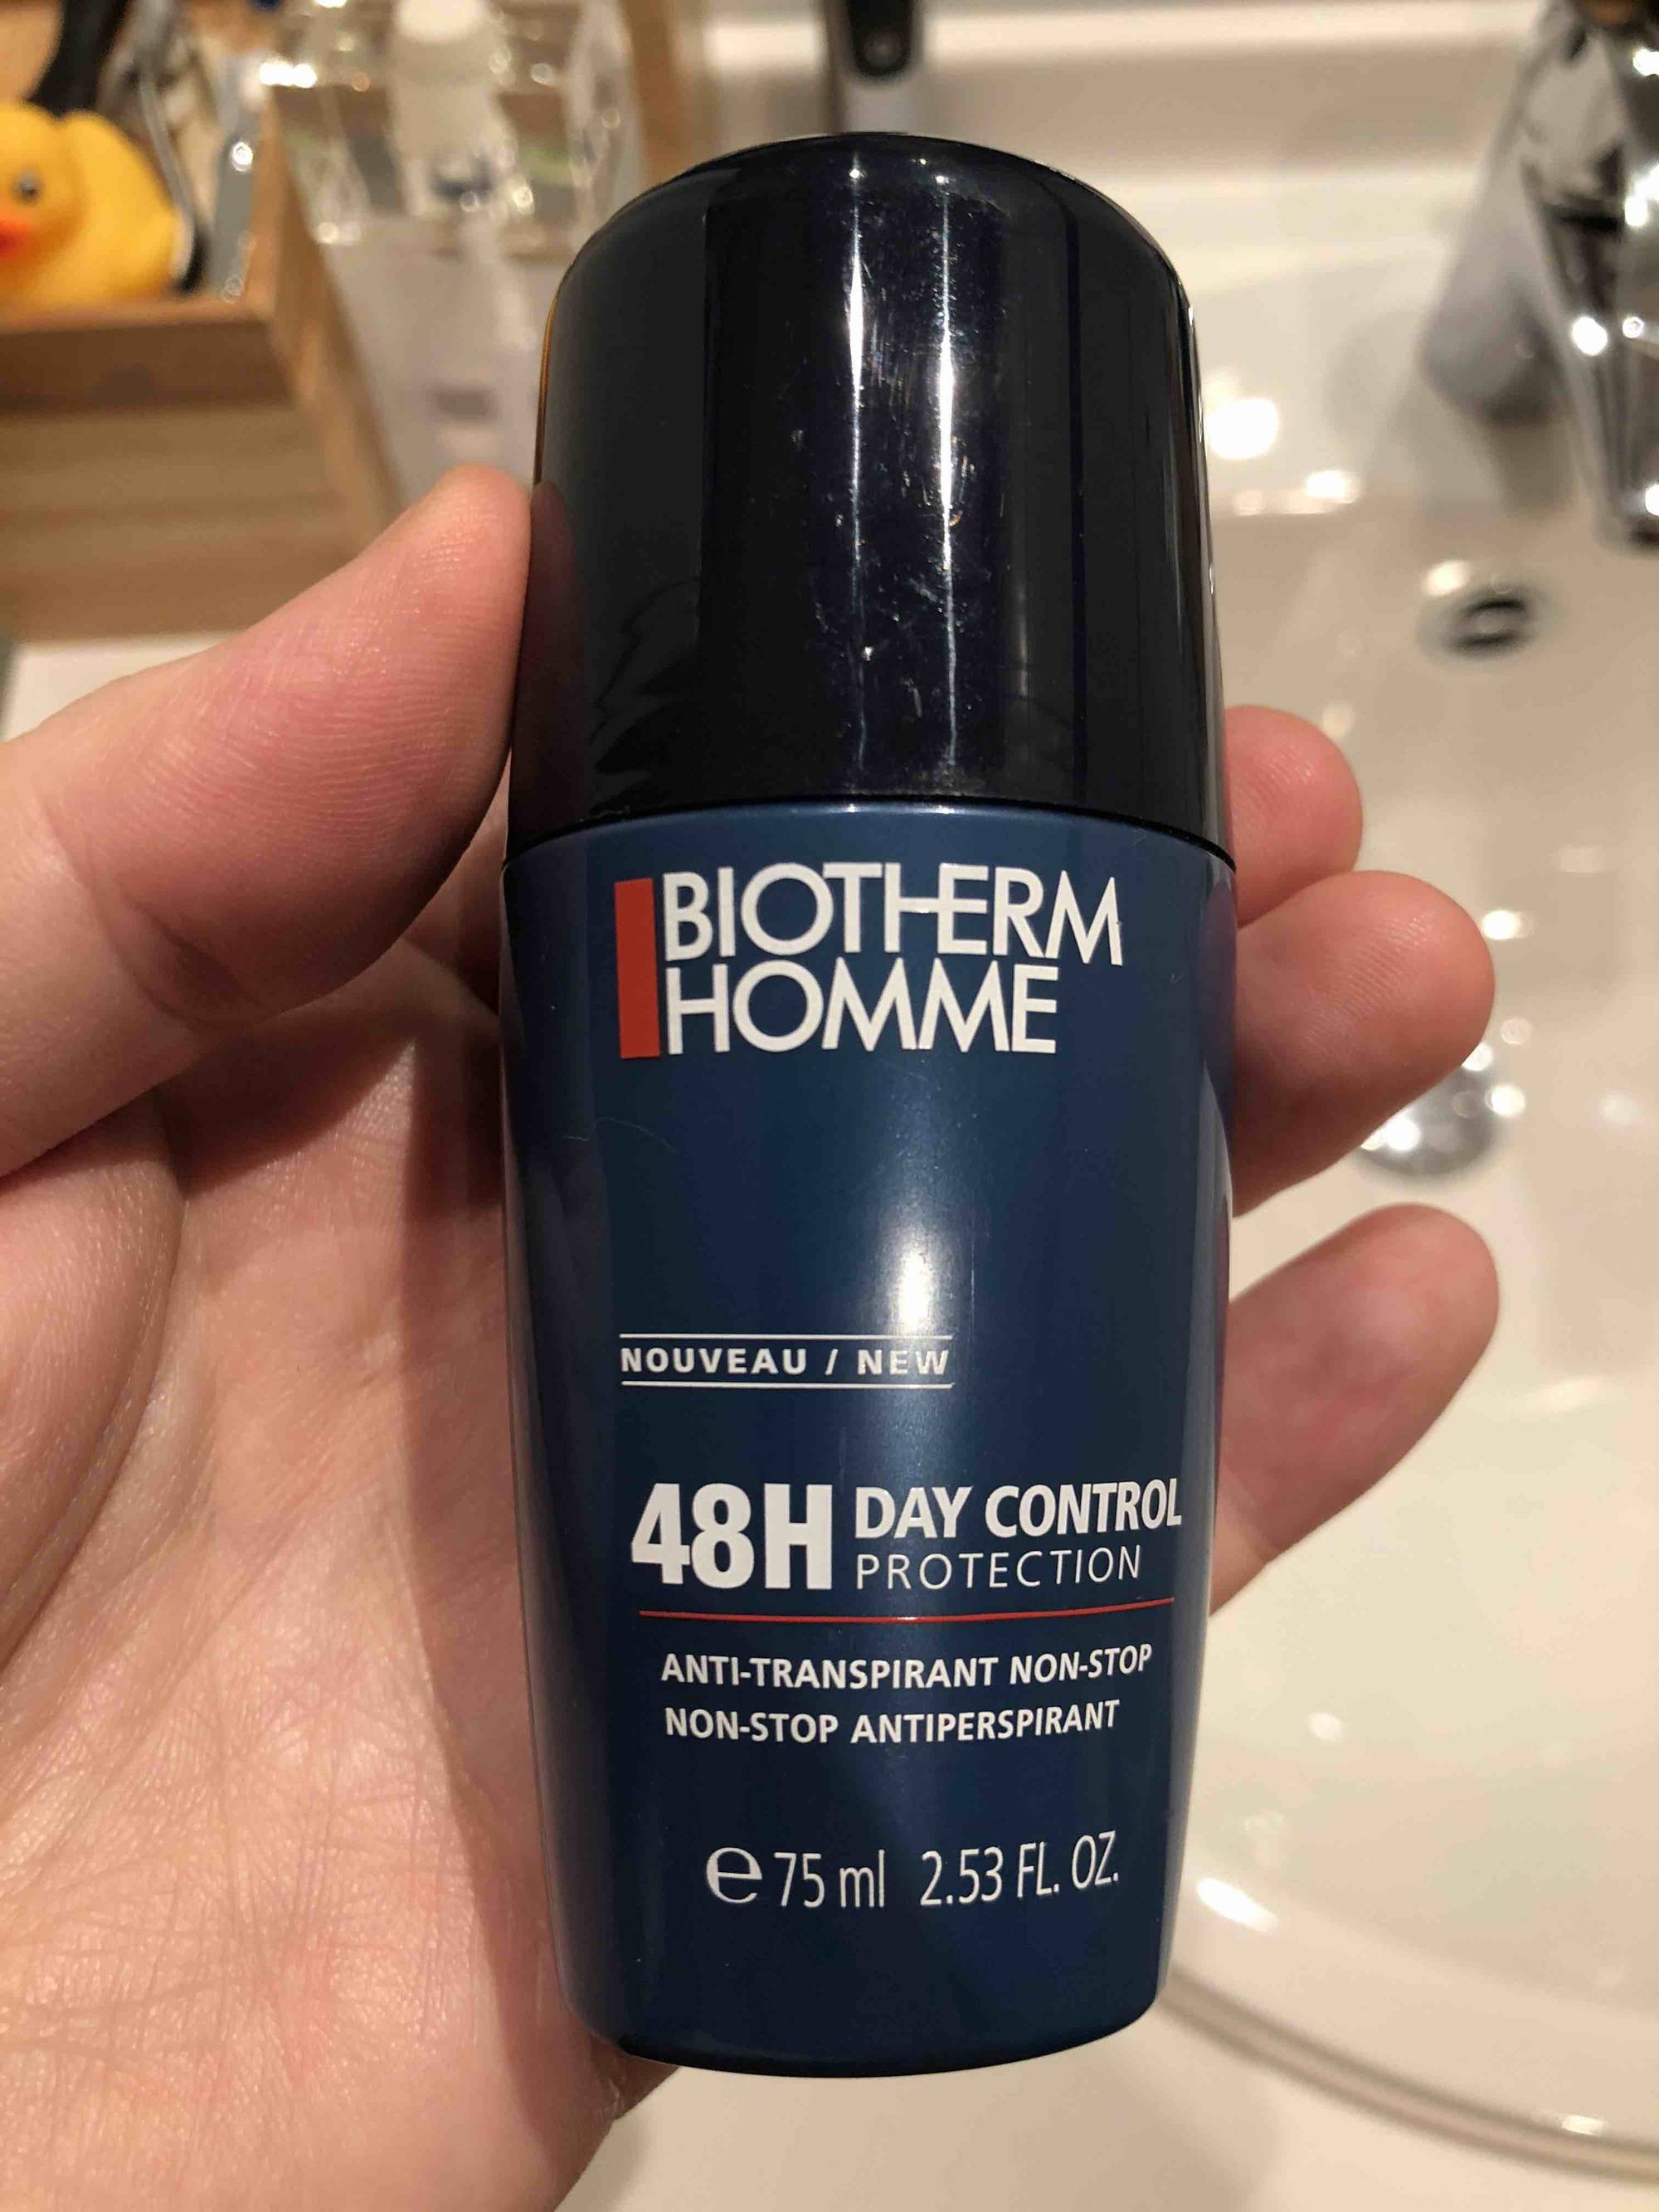 BIOTHERM - Homme 48h day control protection - Anti-transpirant